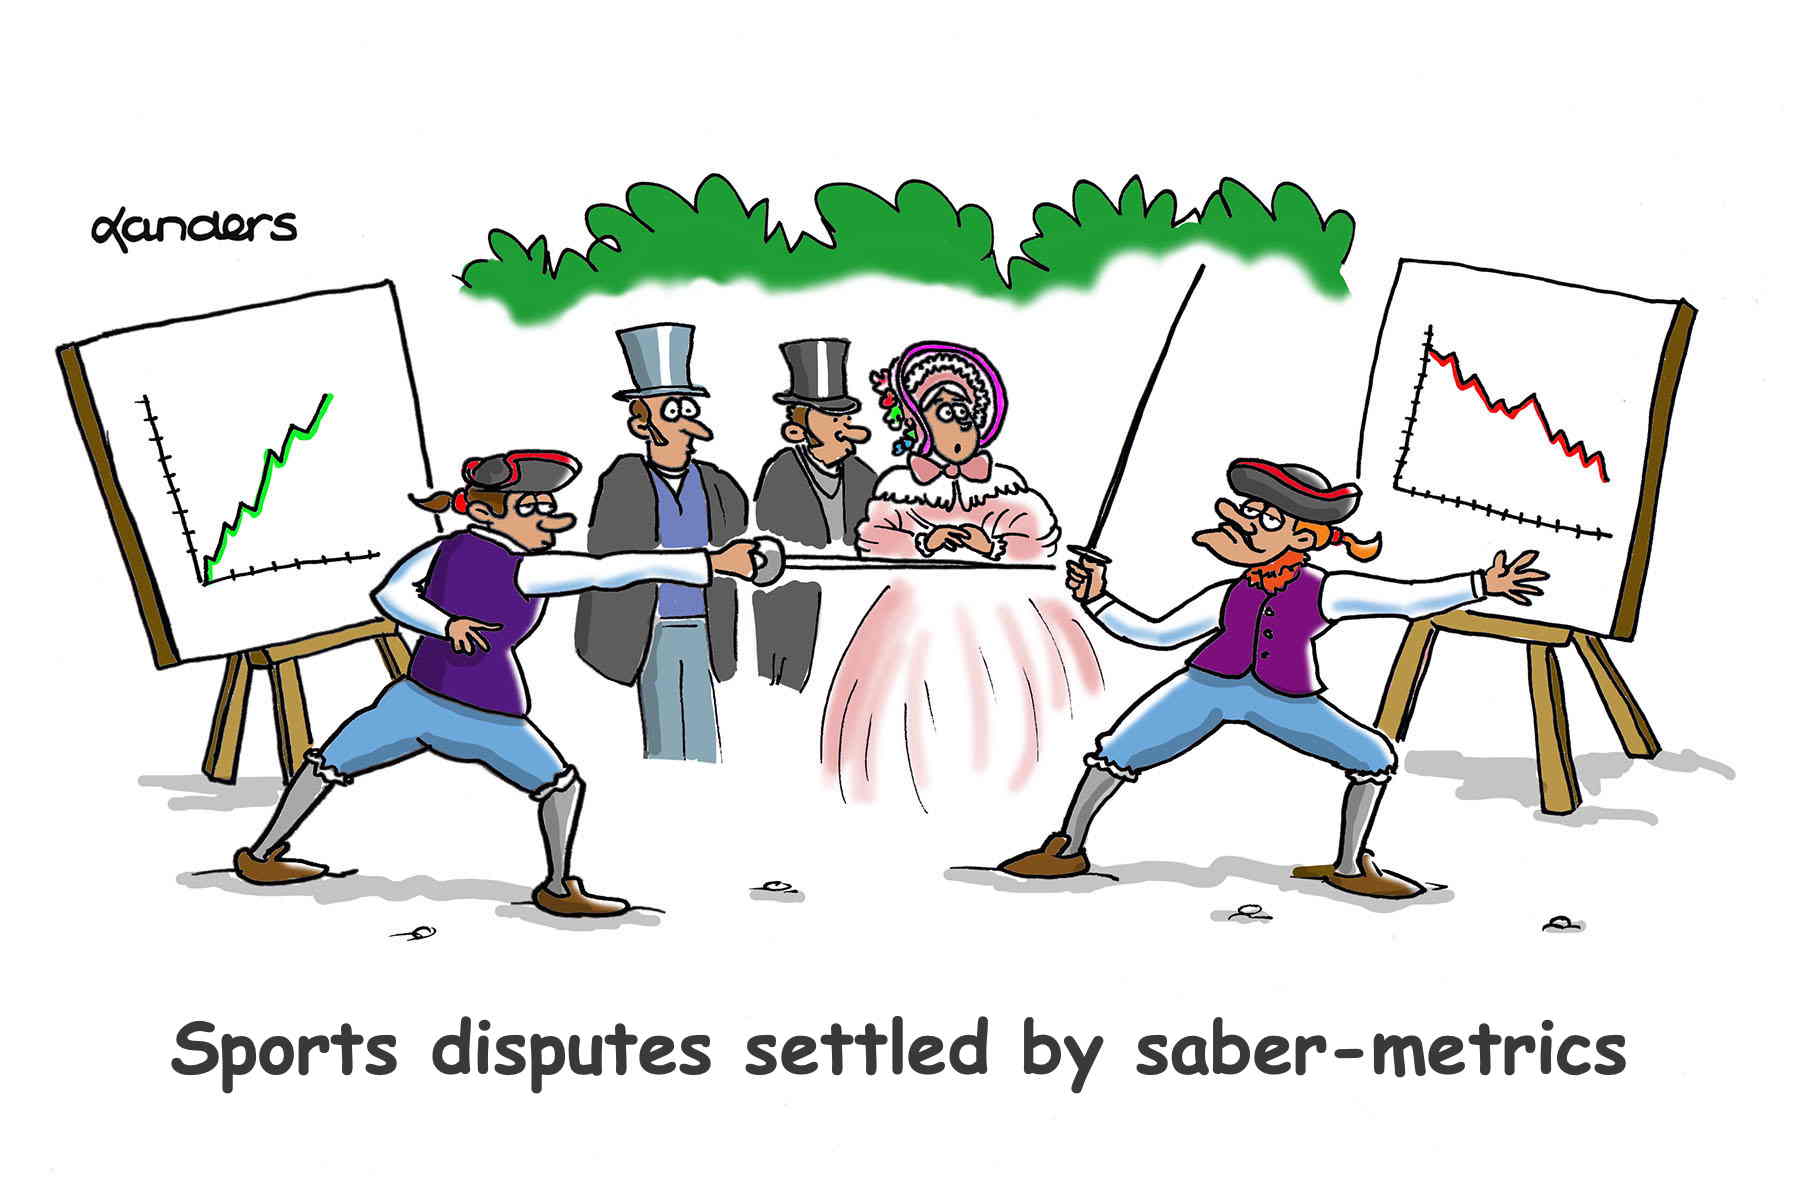 cartoon showing an old fashioned  duel with each combatant standing next to a time series graph. Caption says "Sports disputes settled by Saber-metrics"